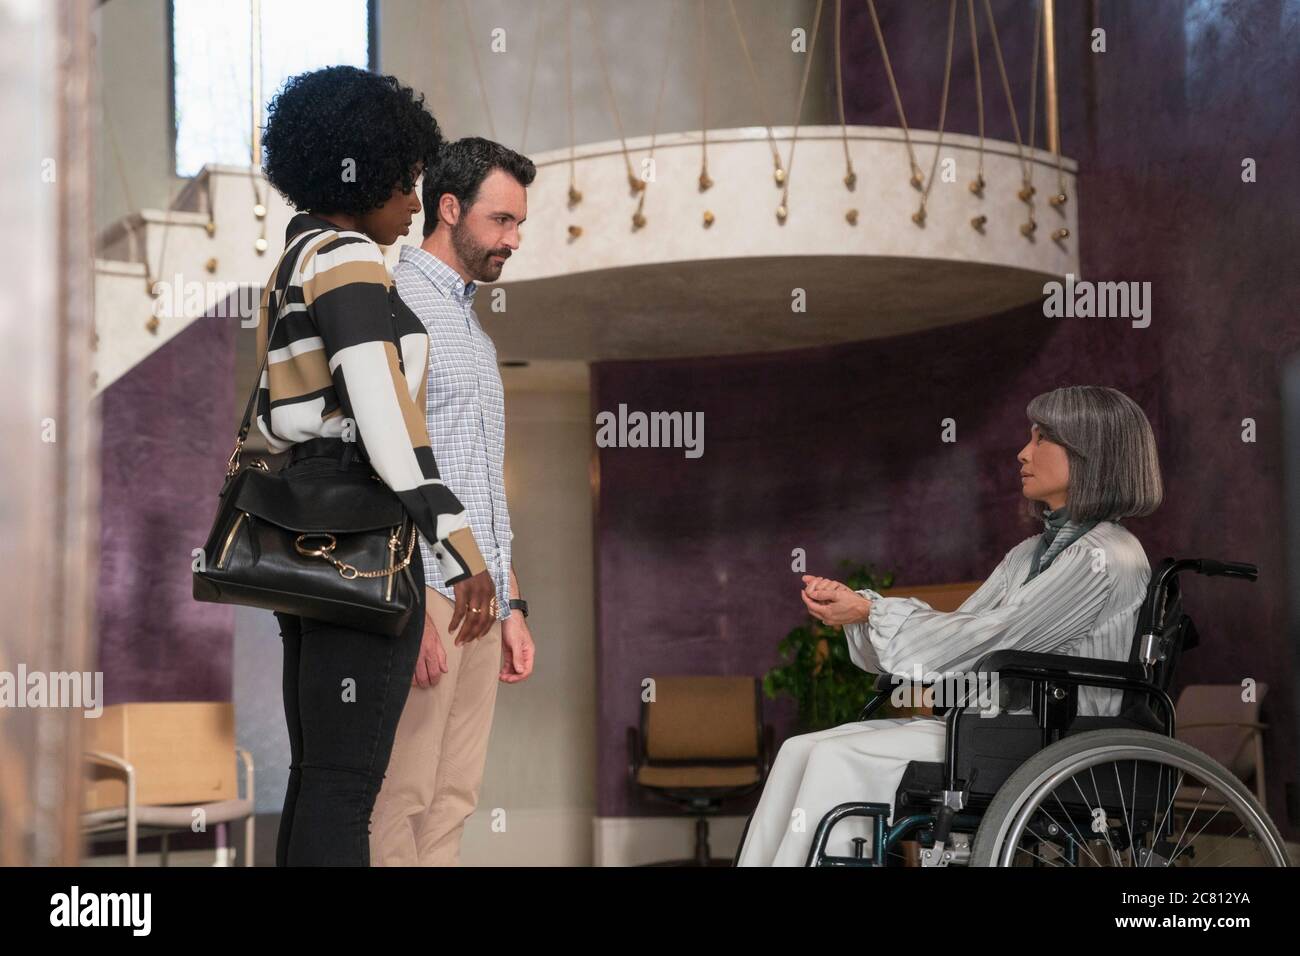 LUCY LIU, REID SCOTT and KIRBY HOWELL-BAPTISTE in WHY WOMEN KILL (2020), directed by MARC CHERRY. Credit: IMAGINE ENTERTAINMENT / CBS TELEVISION STUDIOS / Album Stock Photo